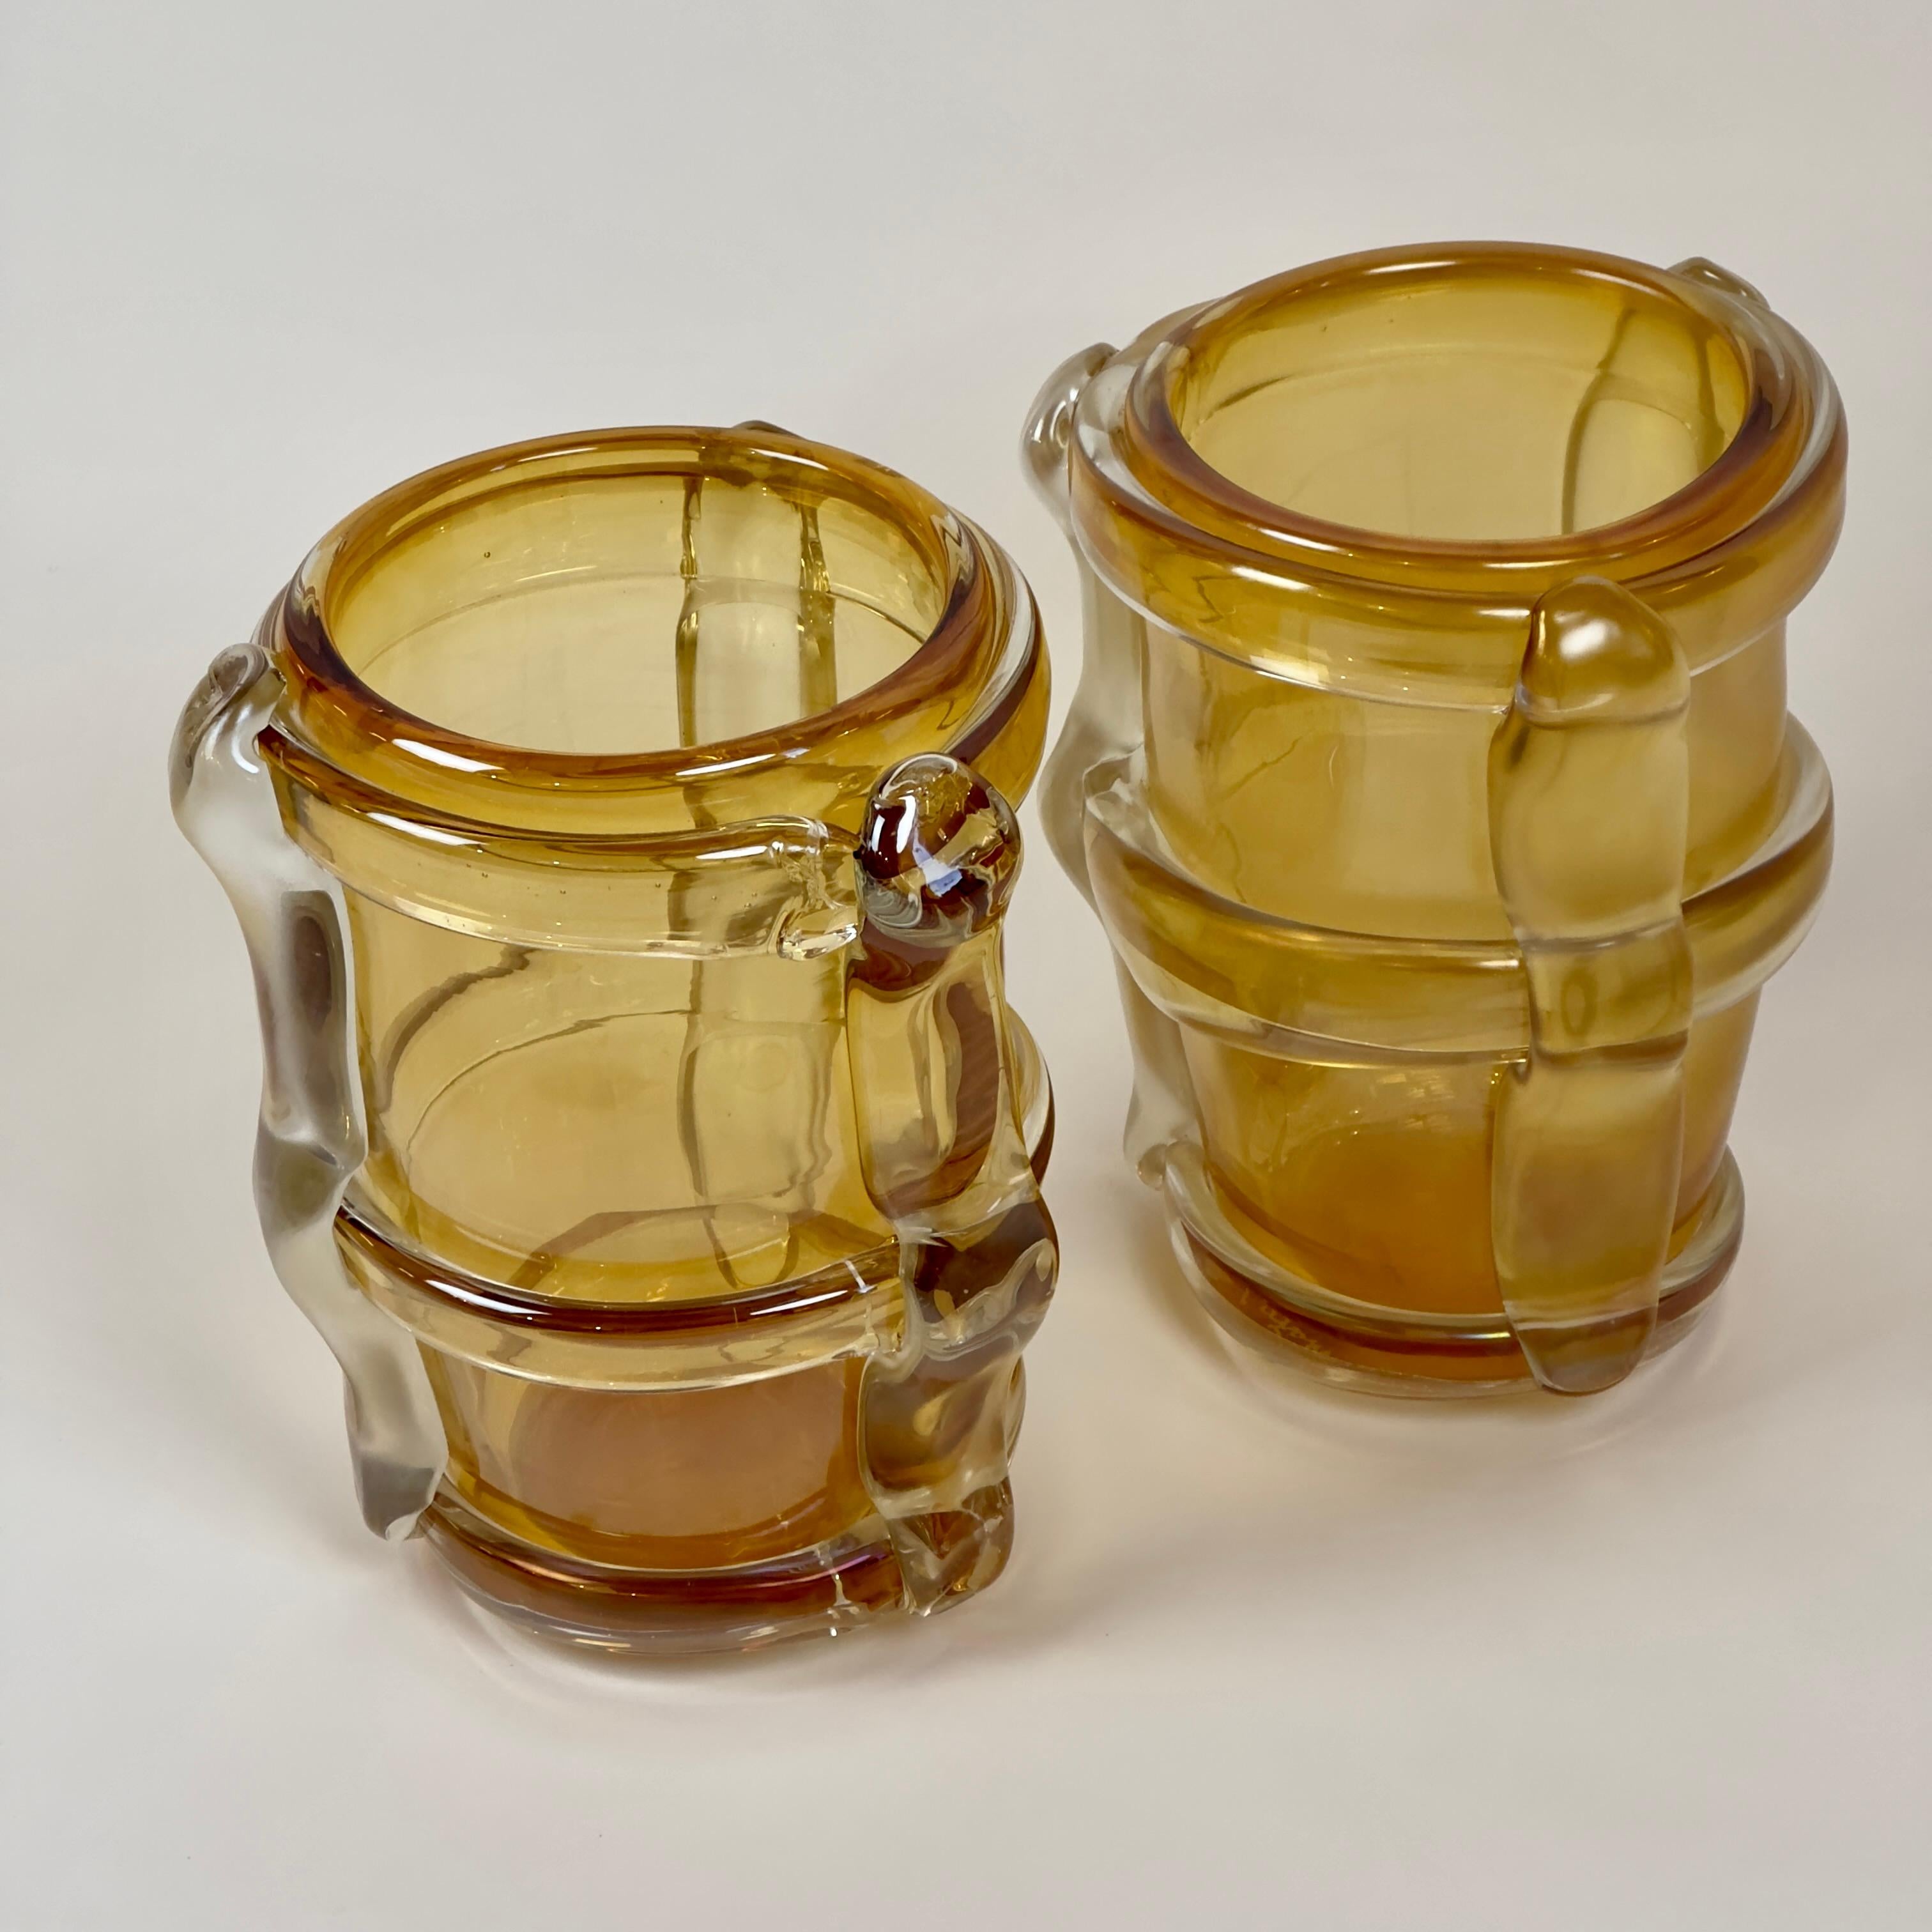 Late 20th century pair of yellow Murano art glass vases with transparent & matt Murano glass yellow applications. 
One vase has been done on purpose more transparent than the other one. Hince, one vase has a transparent clear finish while the other